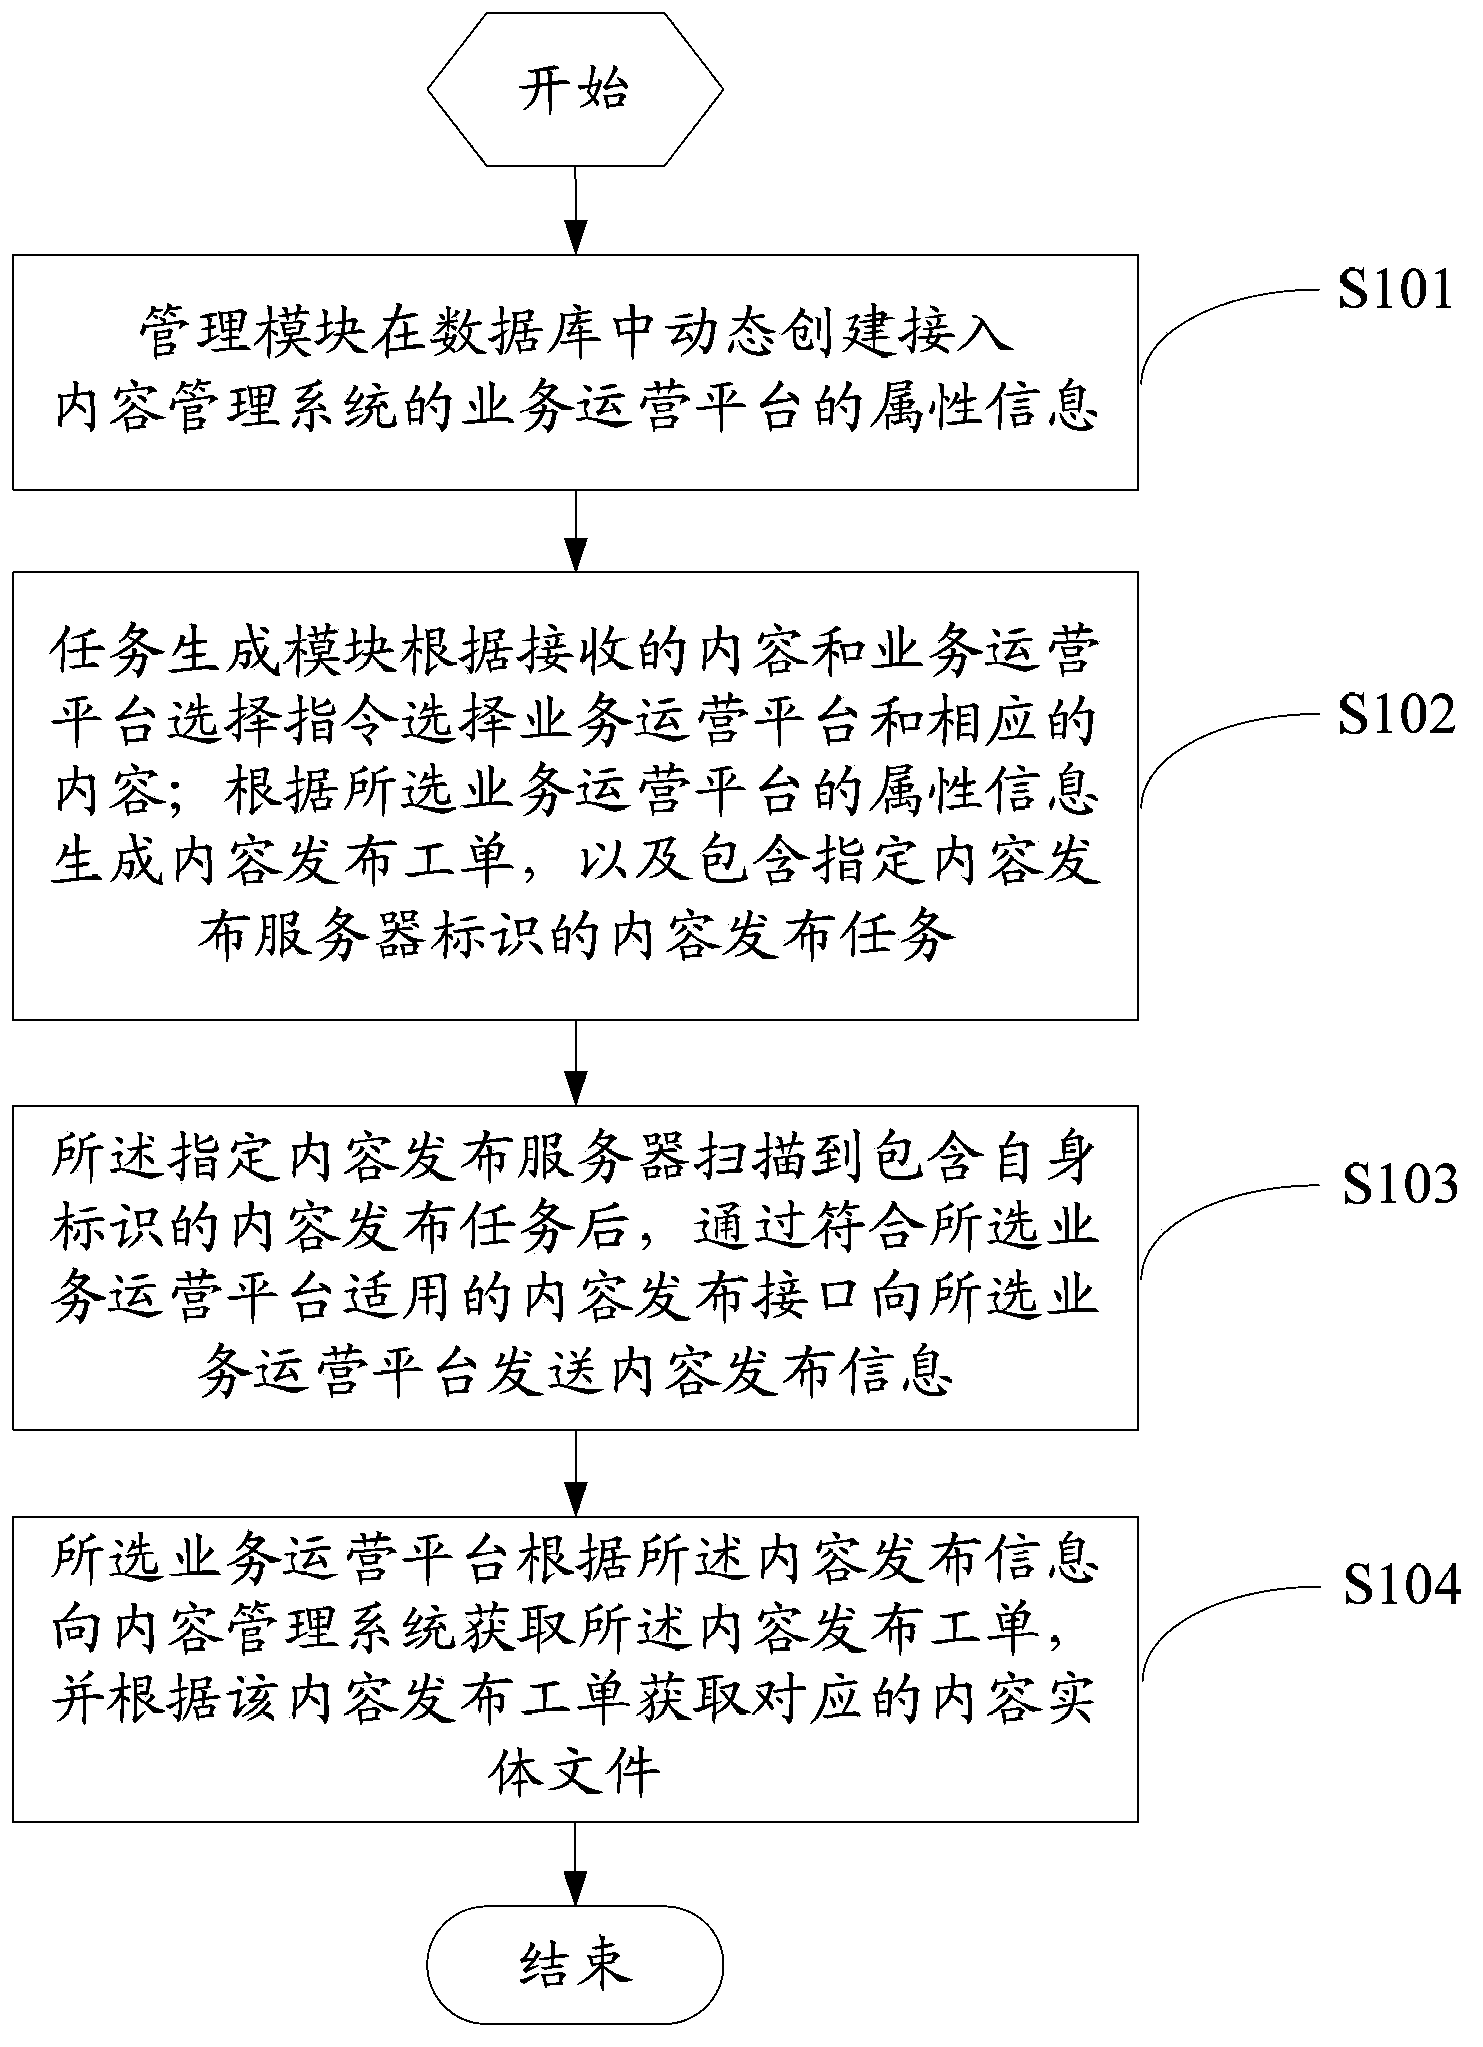 Content publishing system and content publishing method